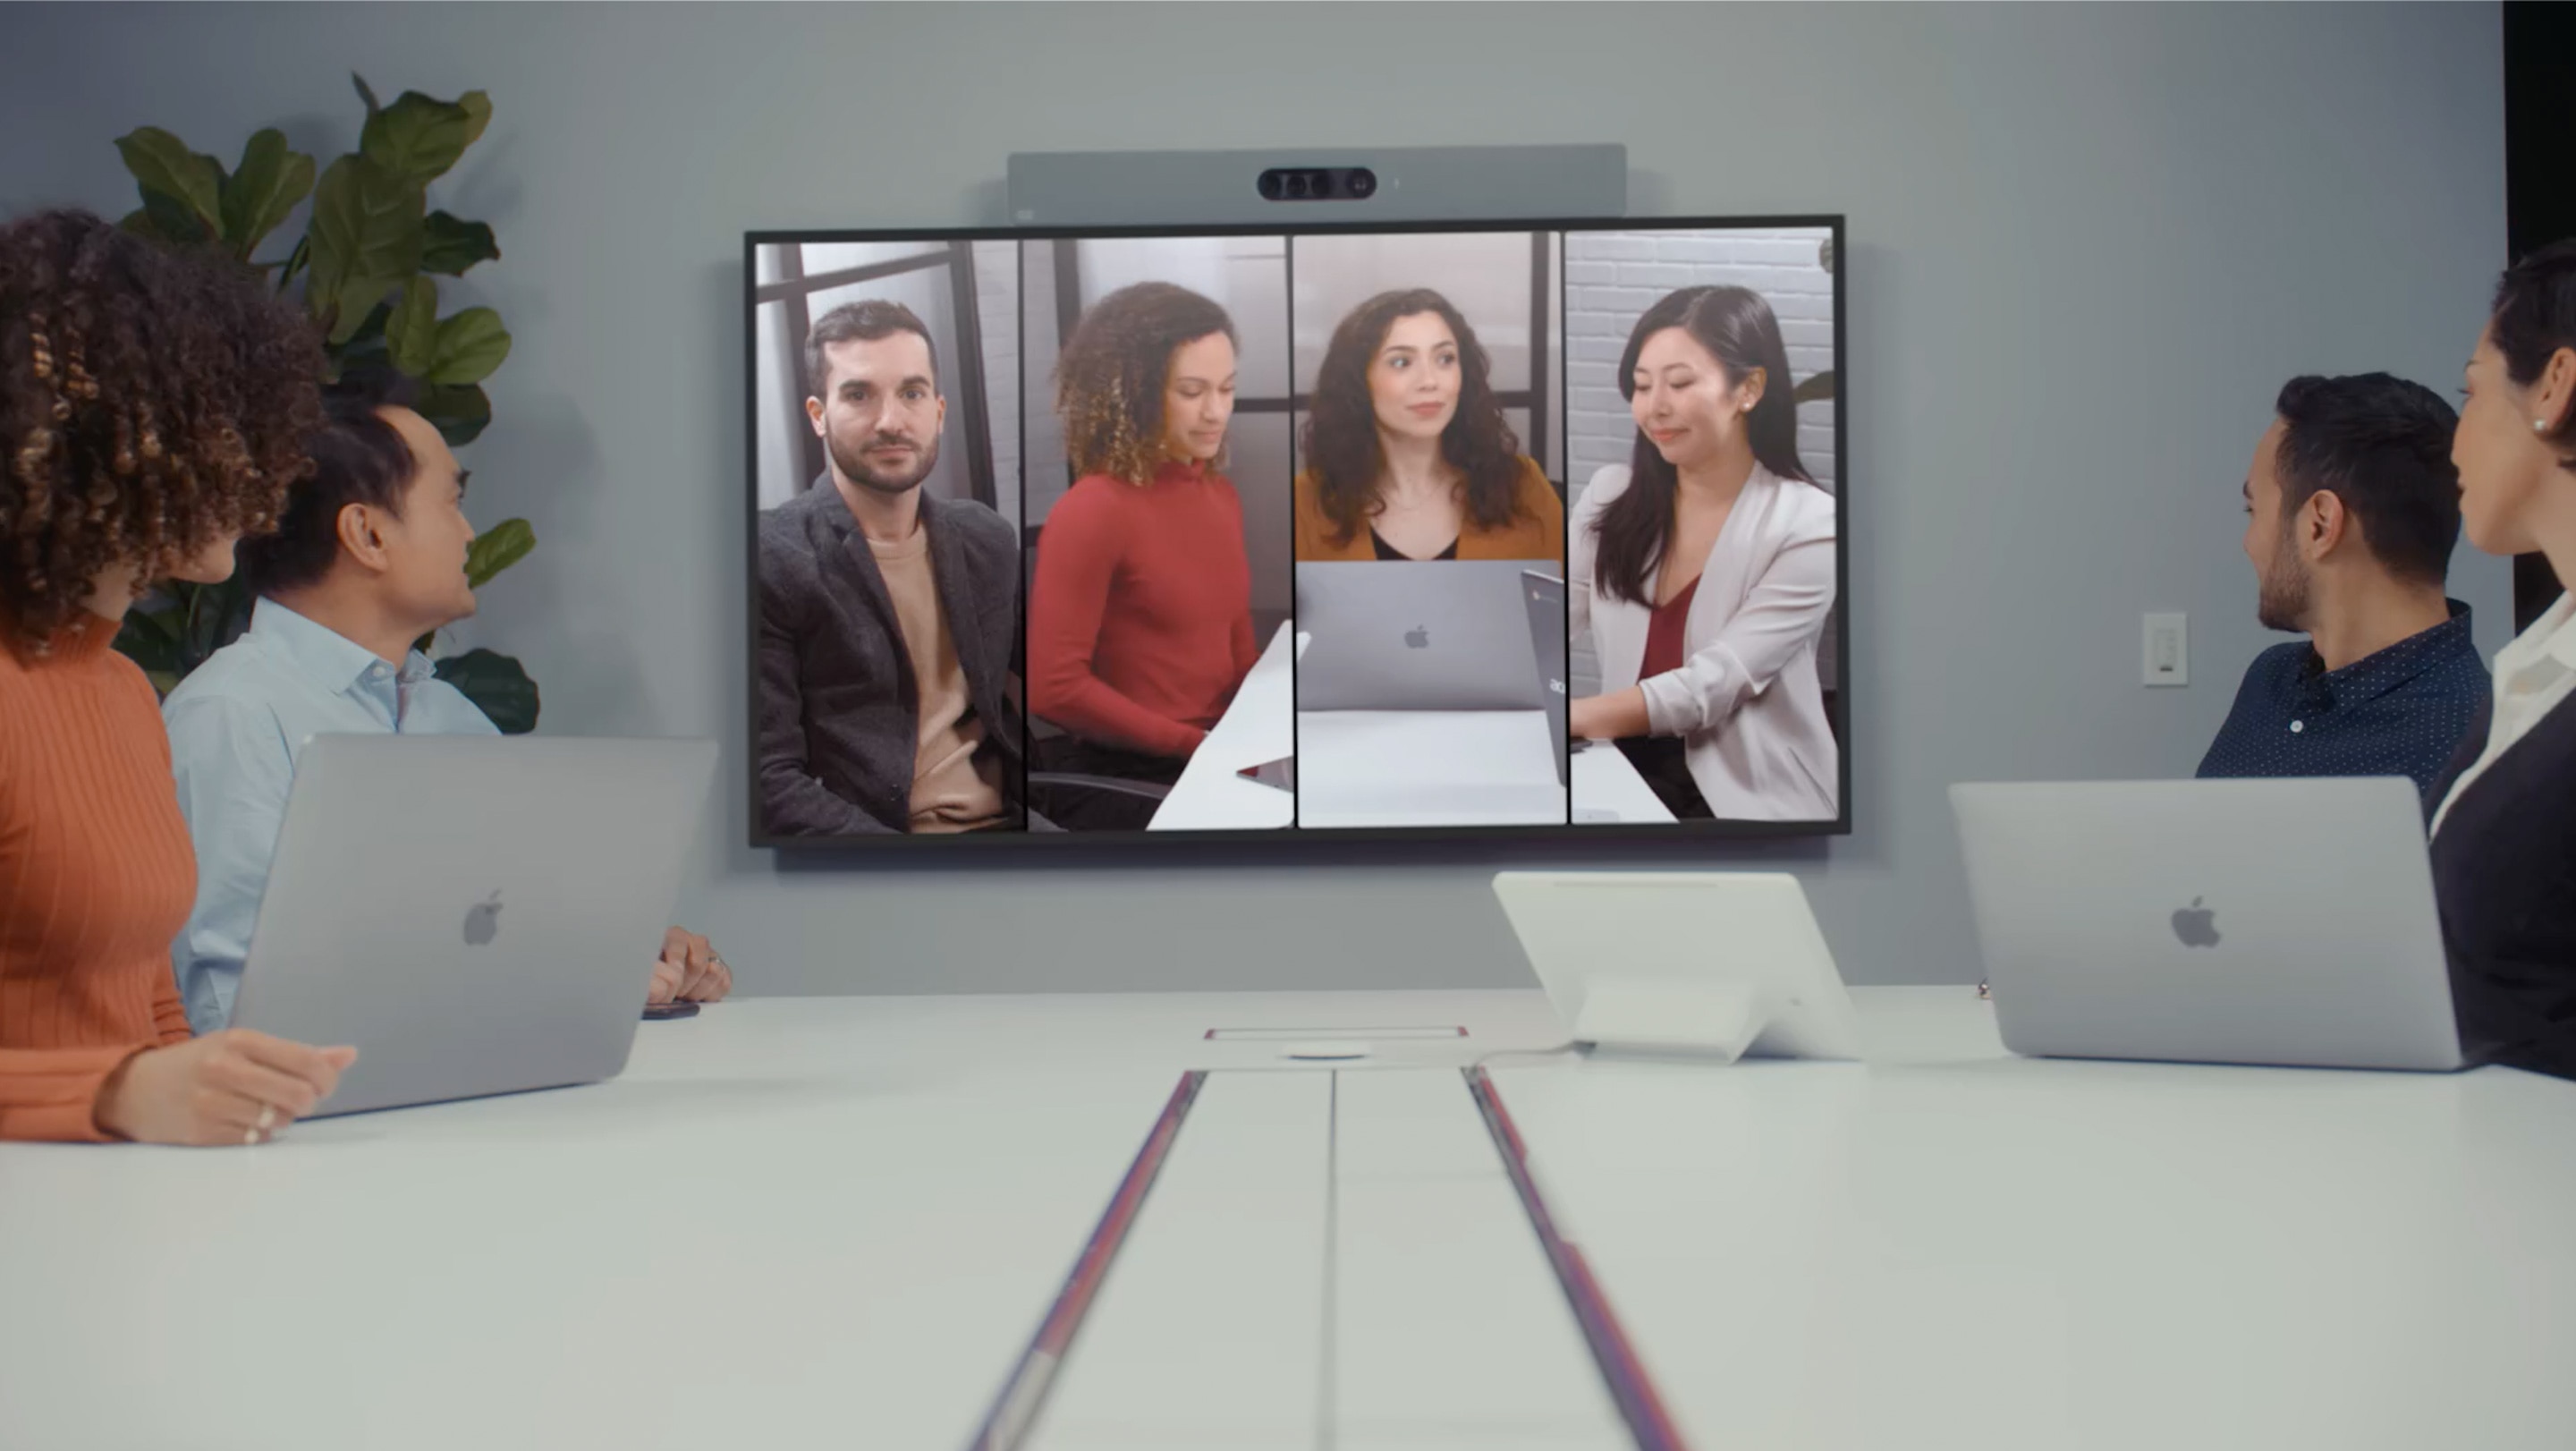 Camera intelligence for video conferencing